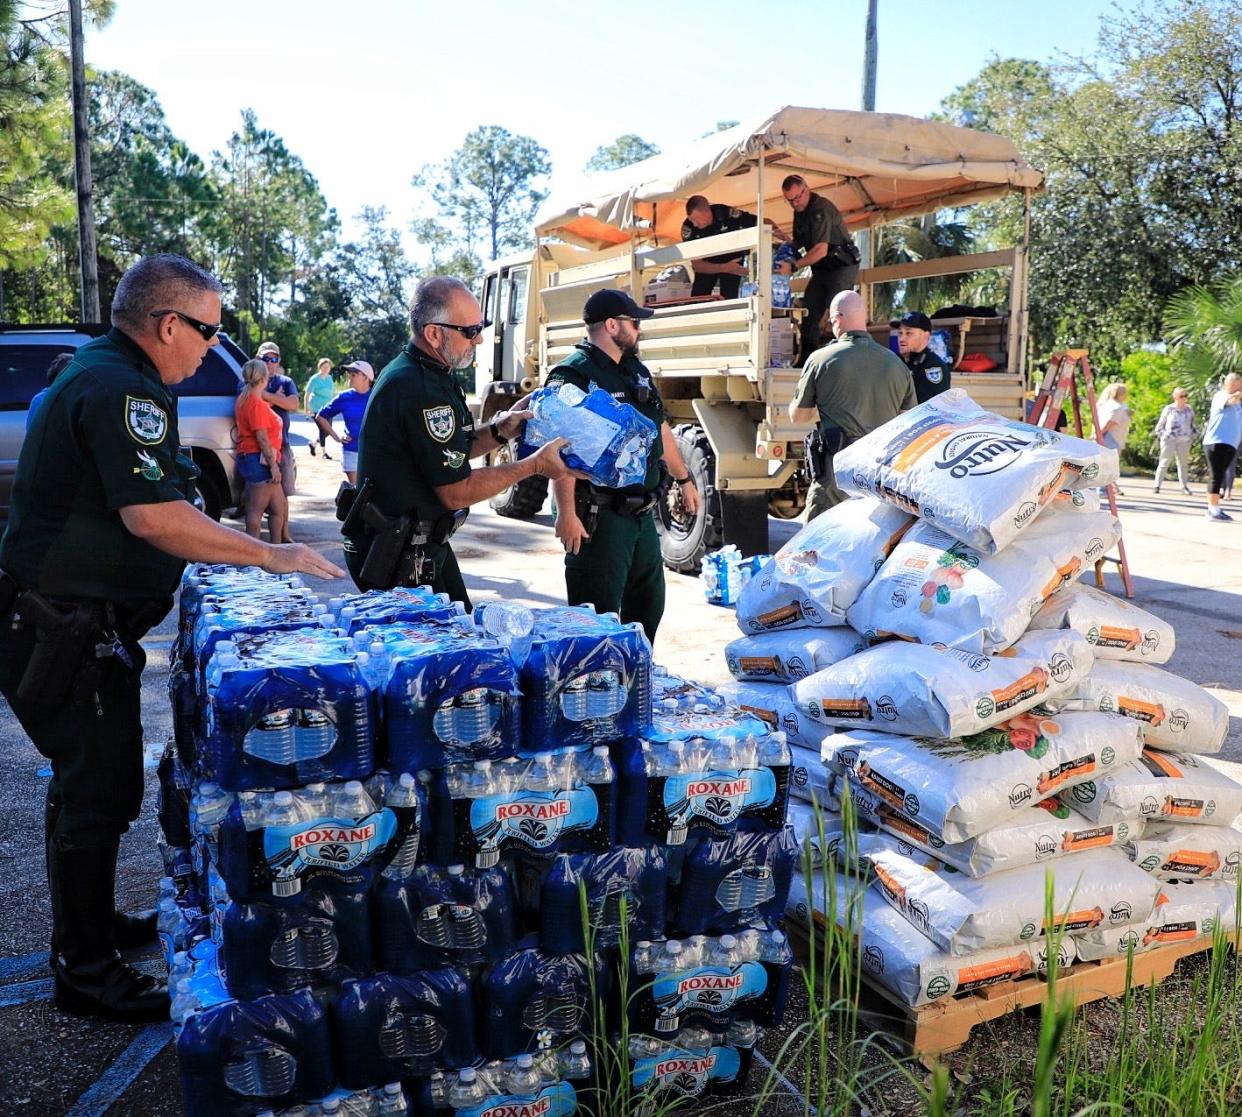 Members of the Volusia Sheriff's Office offload cases of water and bags of pet food from a truck Wednesday for Lake Harney Woods residents still dealing with flooding after Ian.